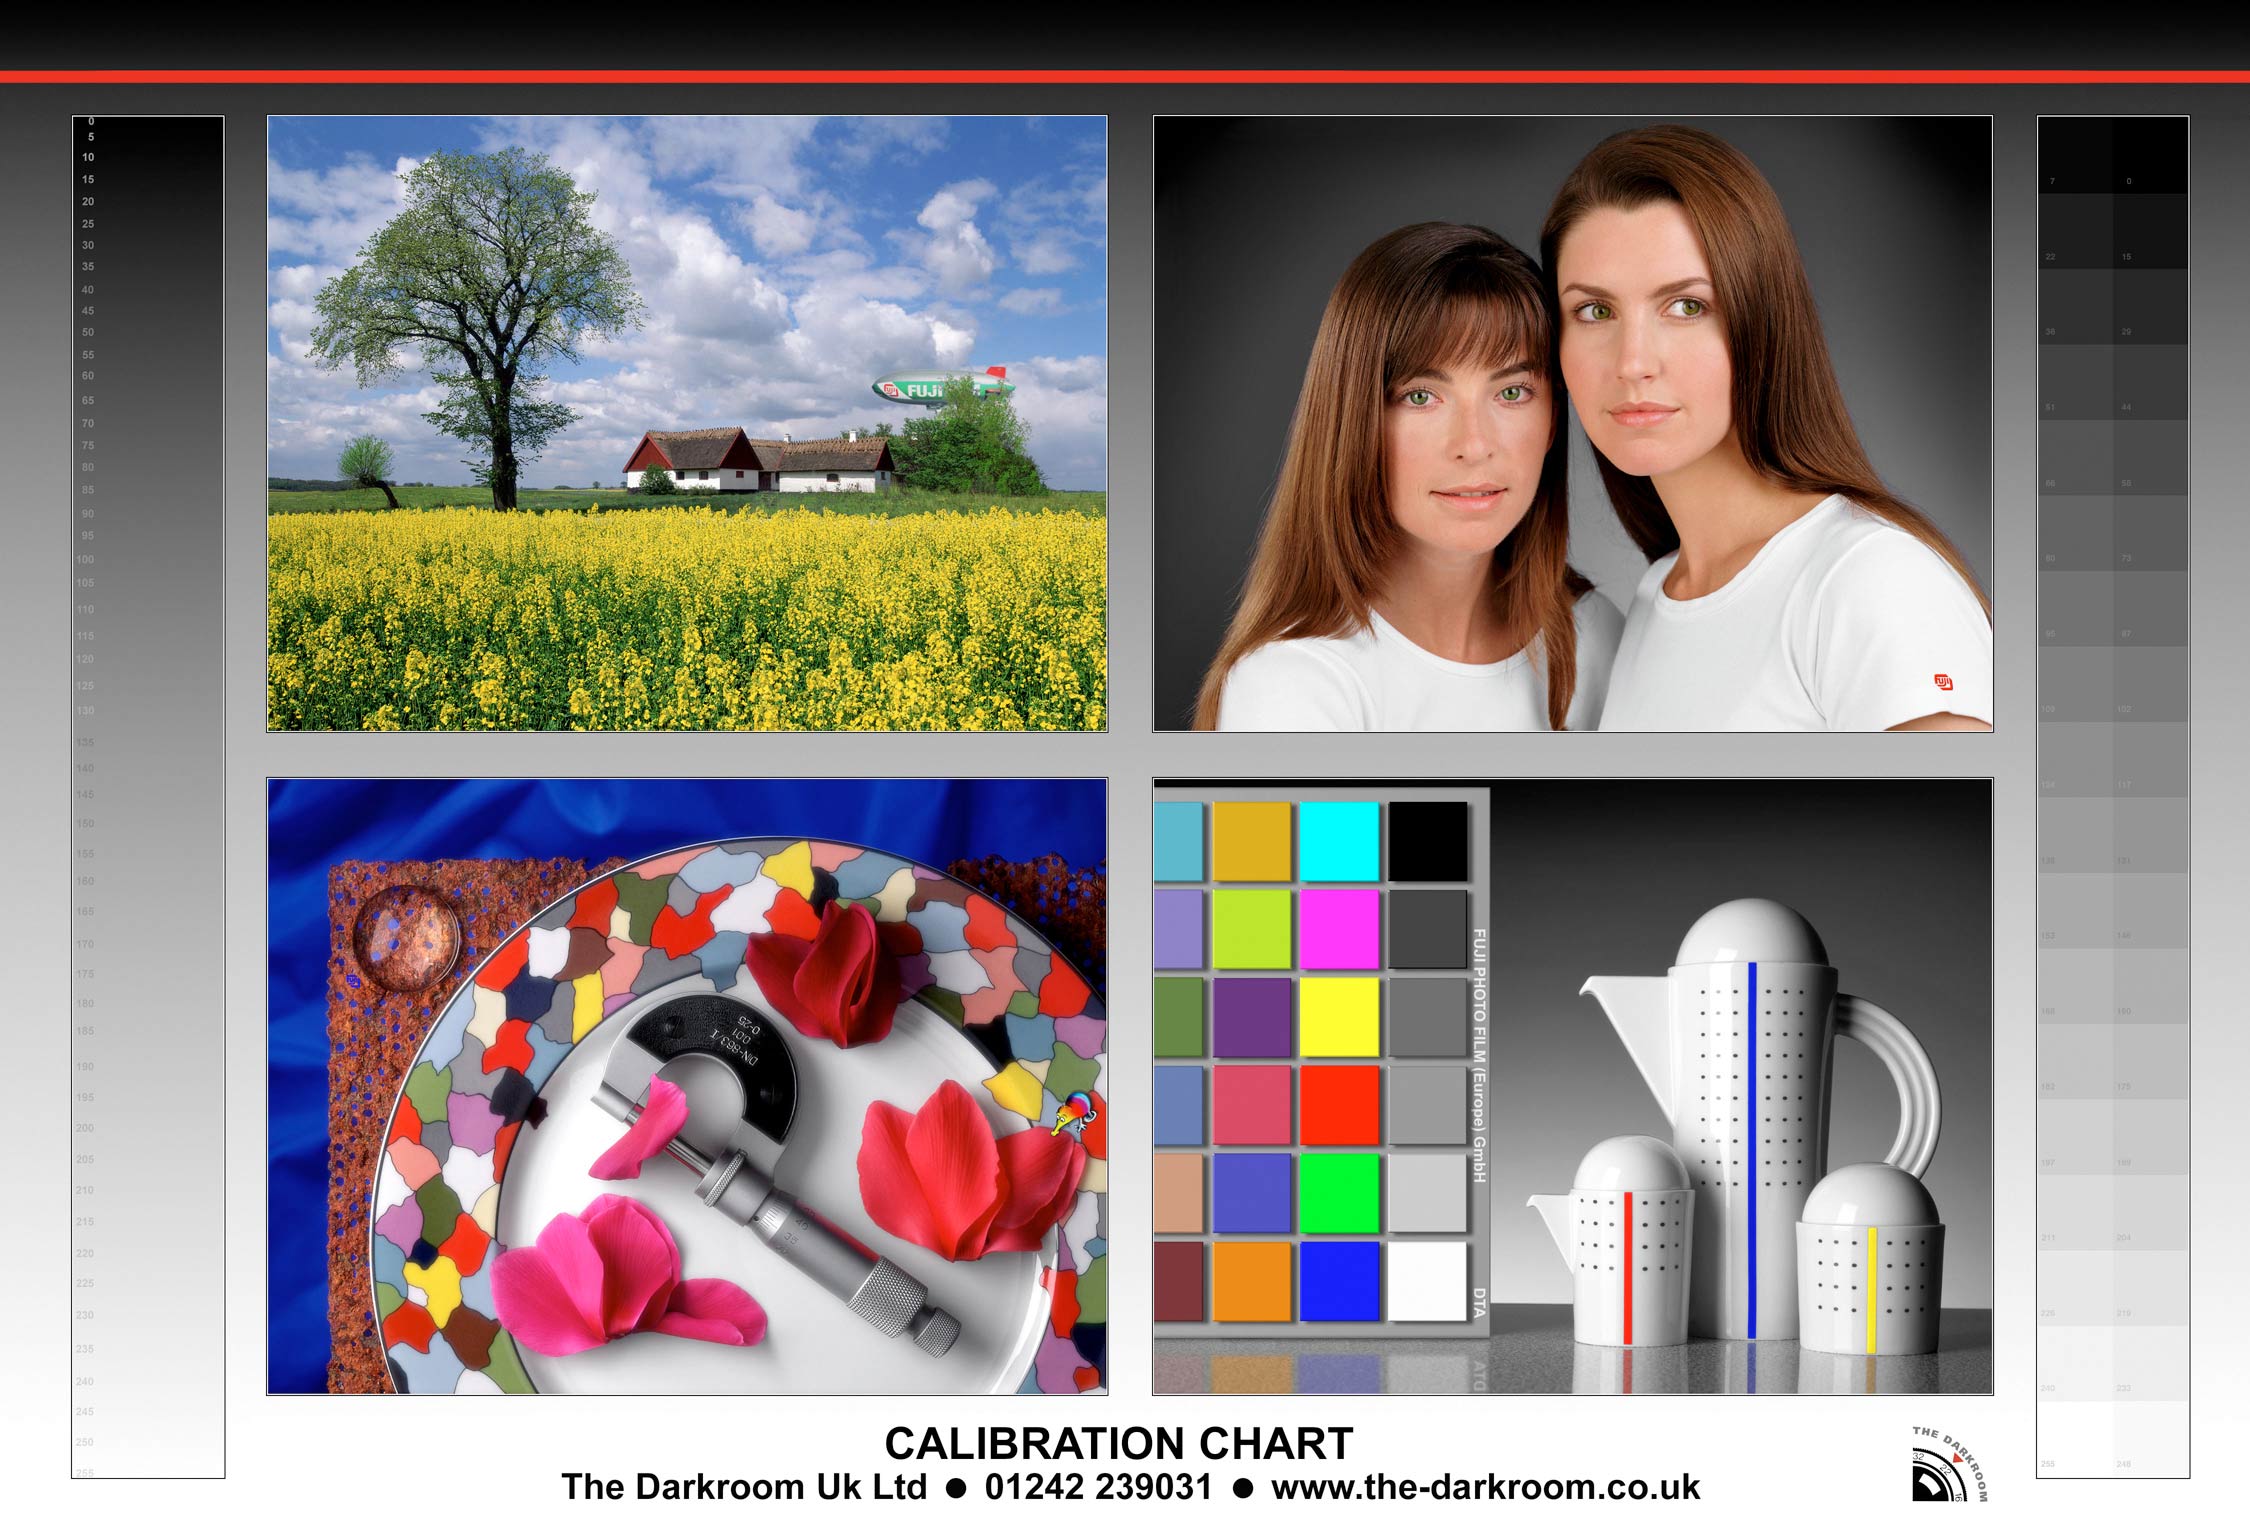 Calibration Image - Digital and film-based photographic printing & products